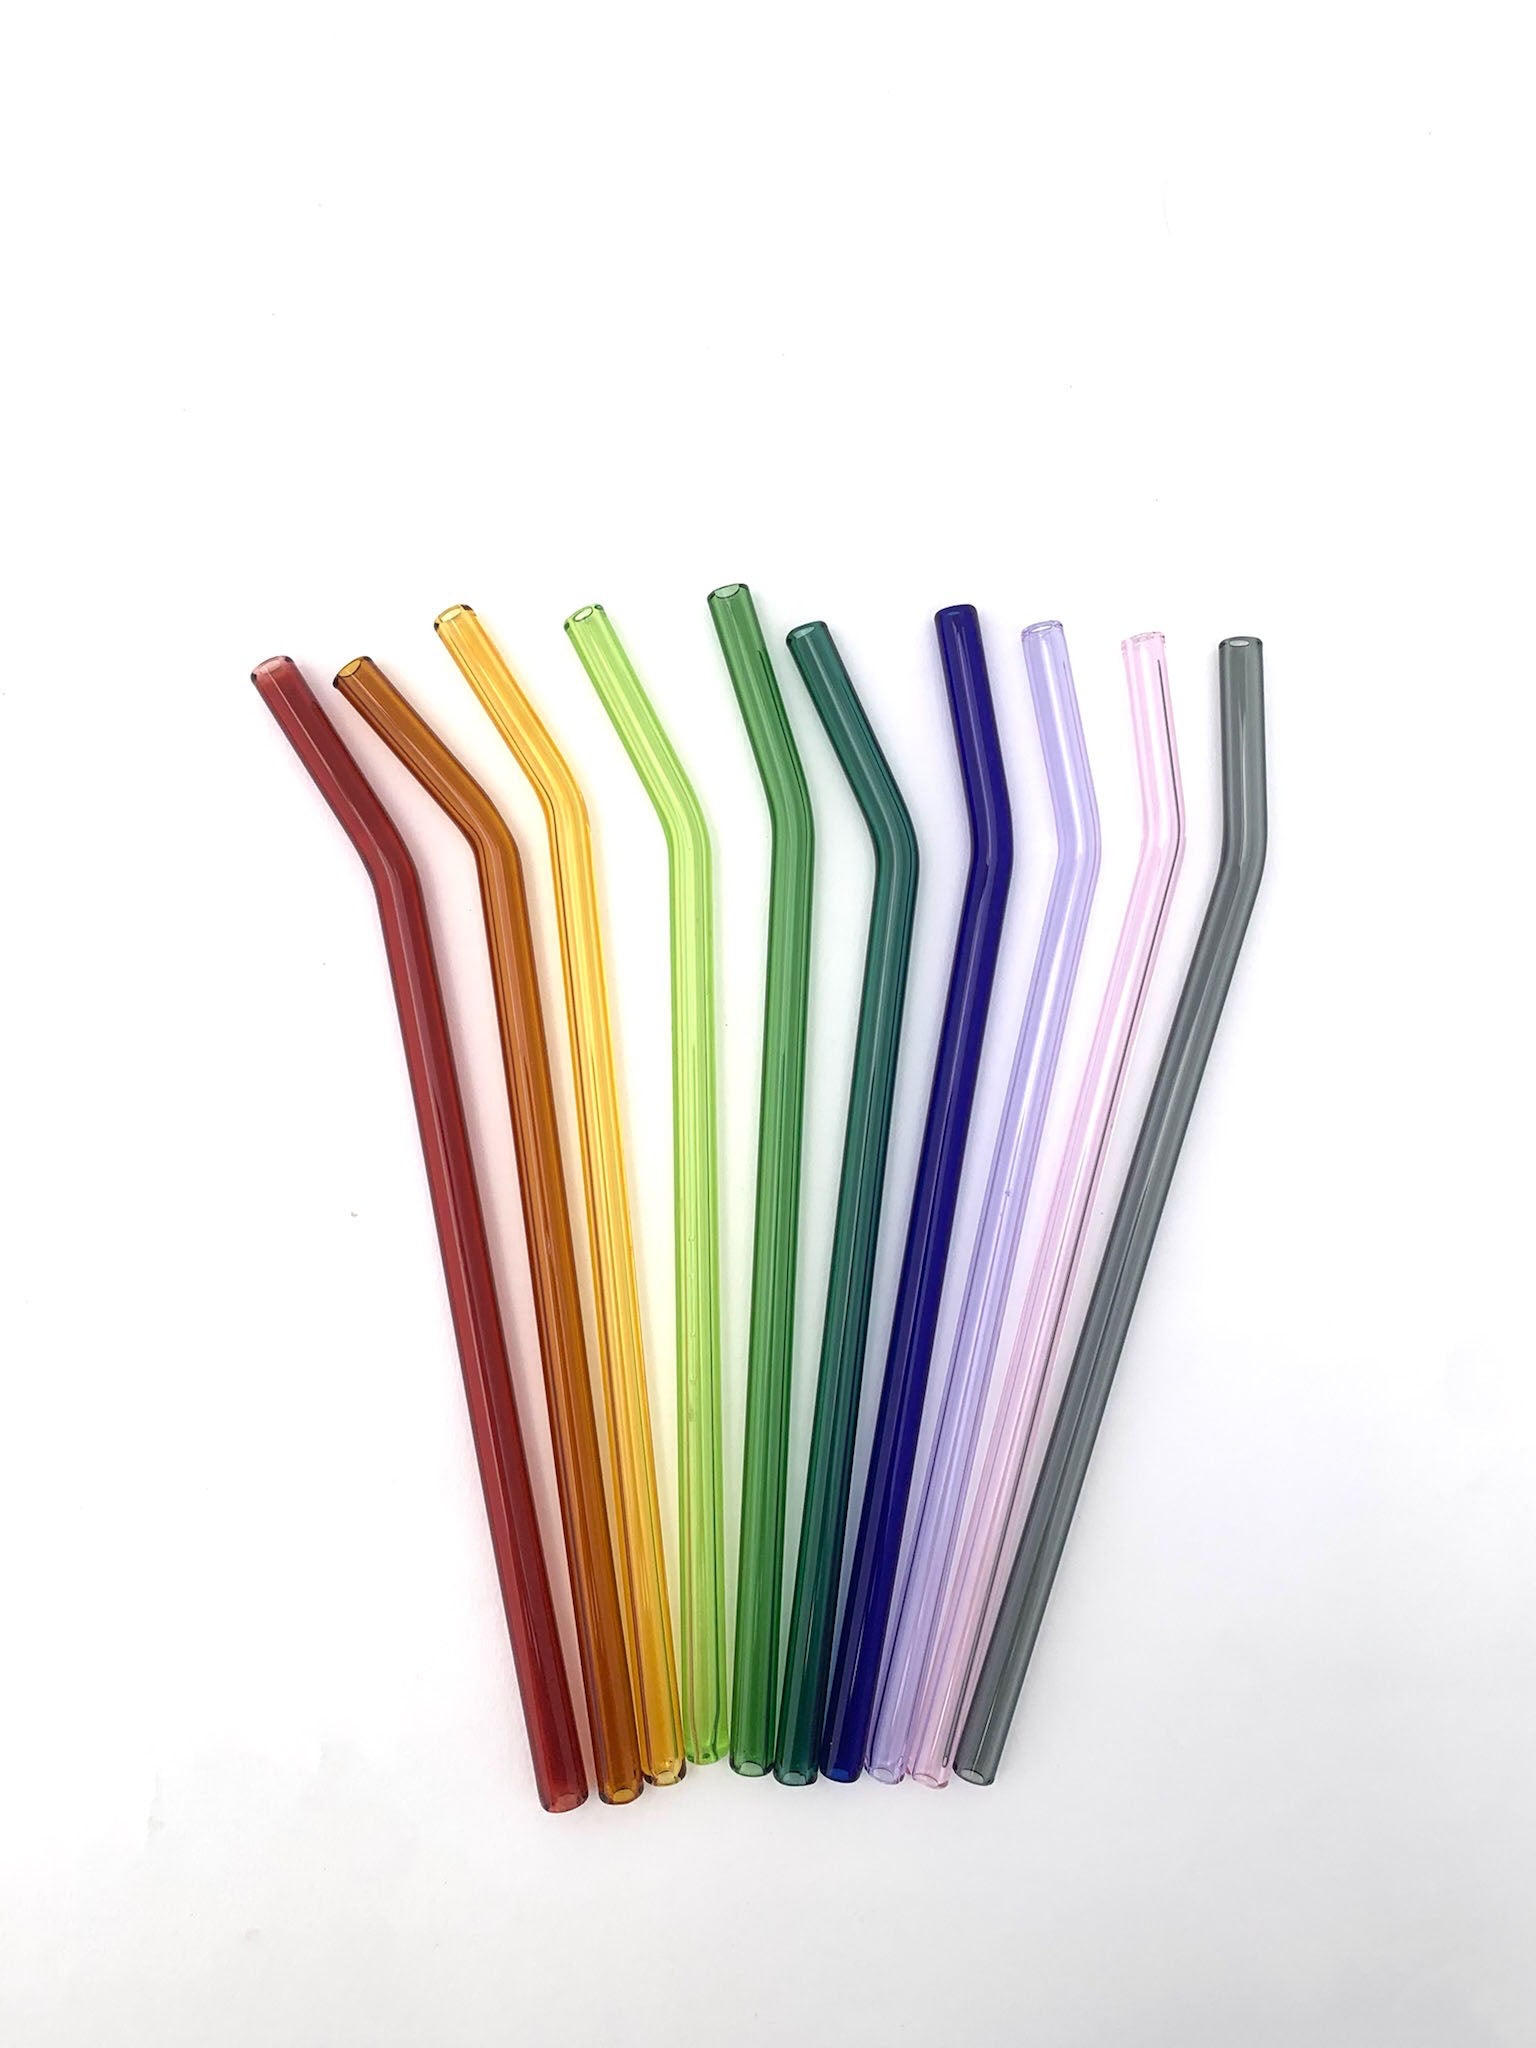 About Our Reusable Glass Drinking Straws